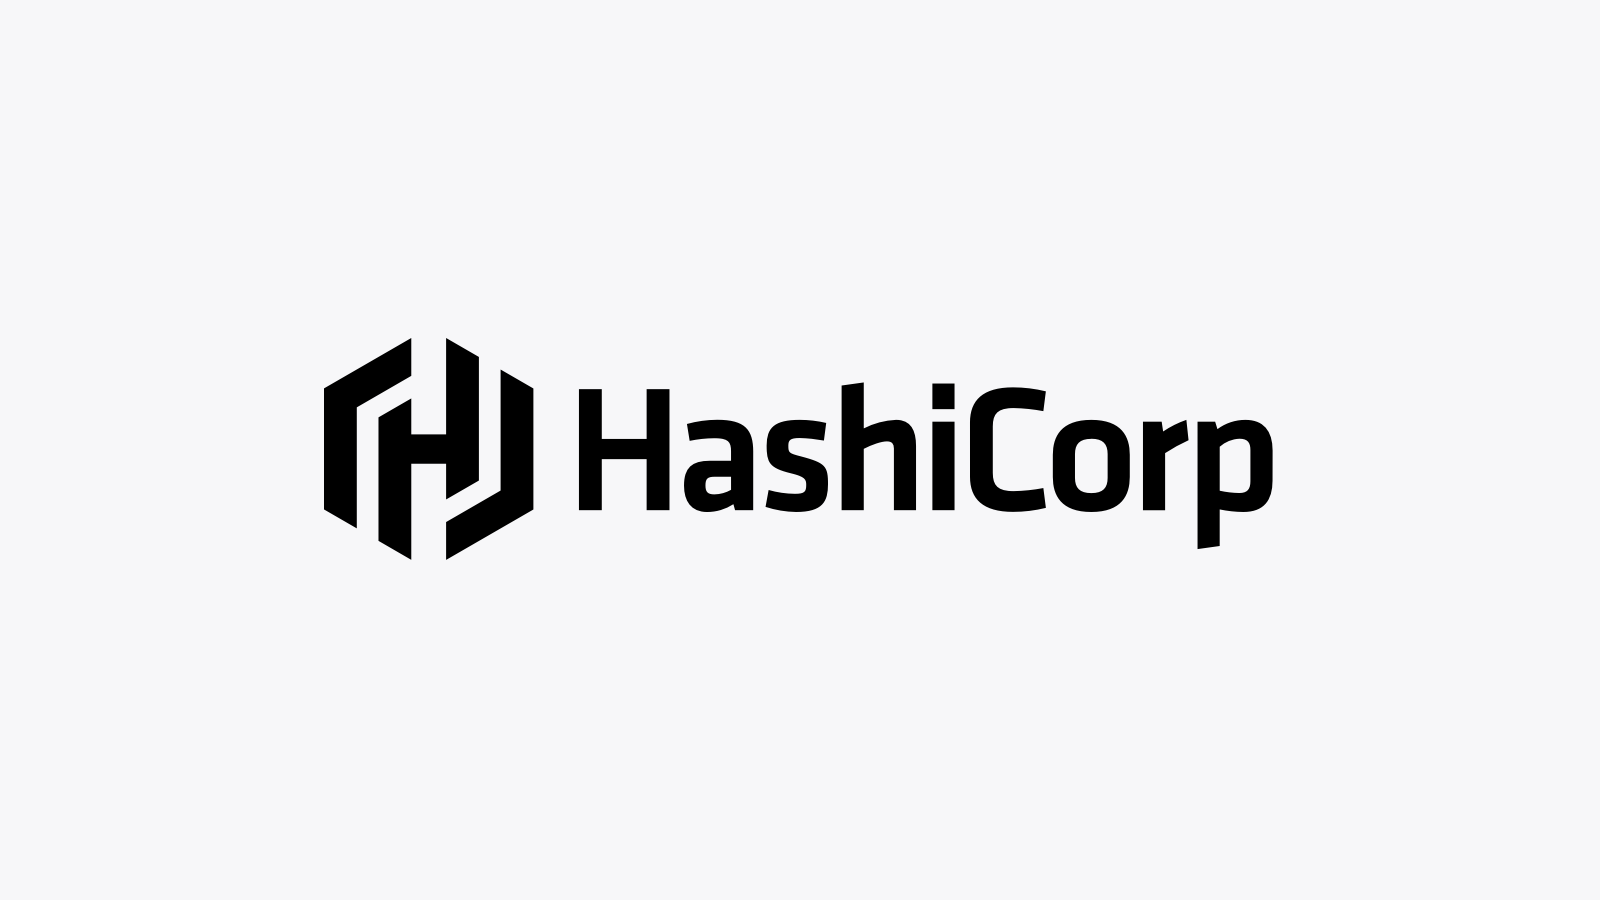 Announcing the 2022 HashiCorp SI & Reseller Partner Network Award Winners